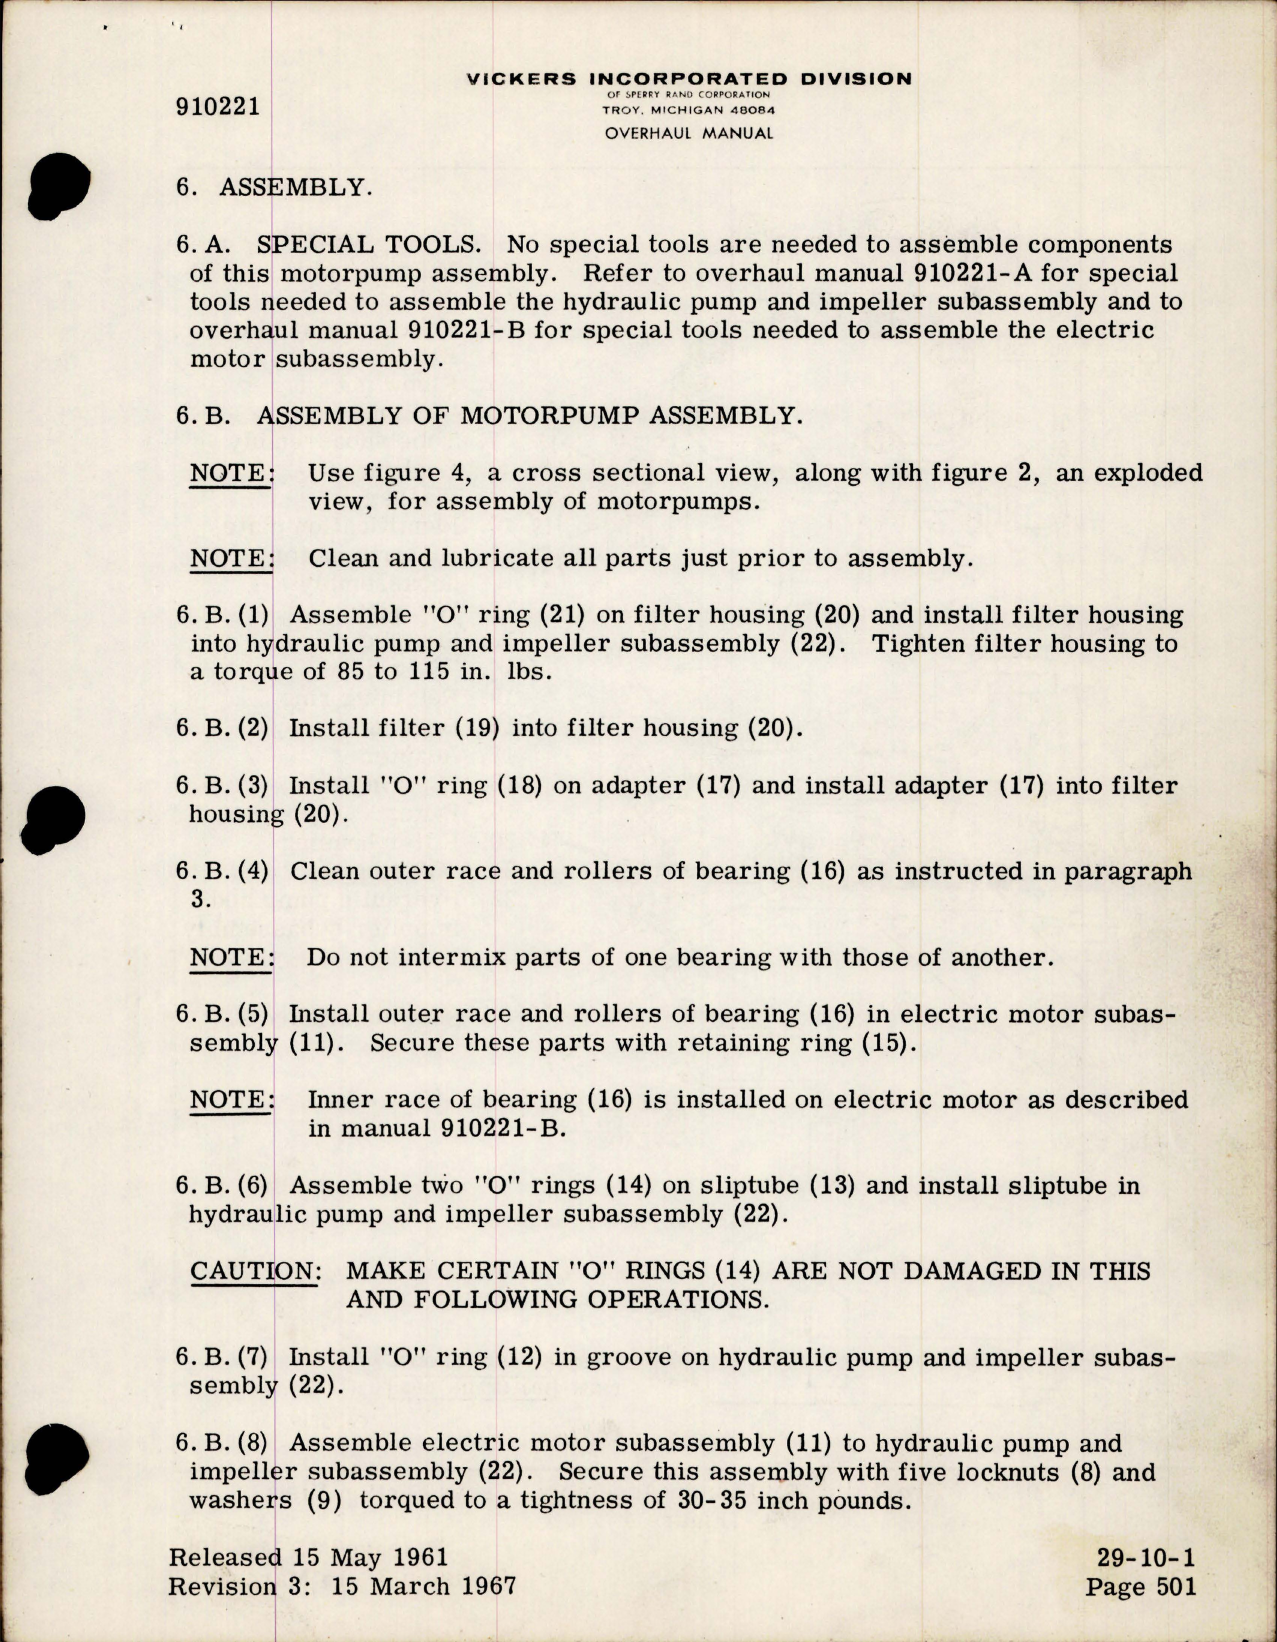 Sample page 9 from AirCorps Library document: Overhaul Manual for Hydraulic Motorpump - Models EA-50182-7 and EA-50182-8 - Revision 4 